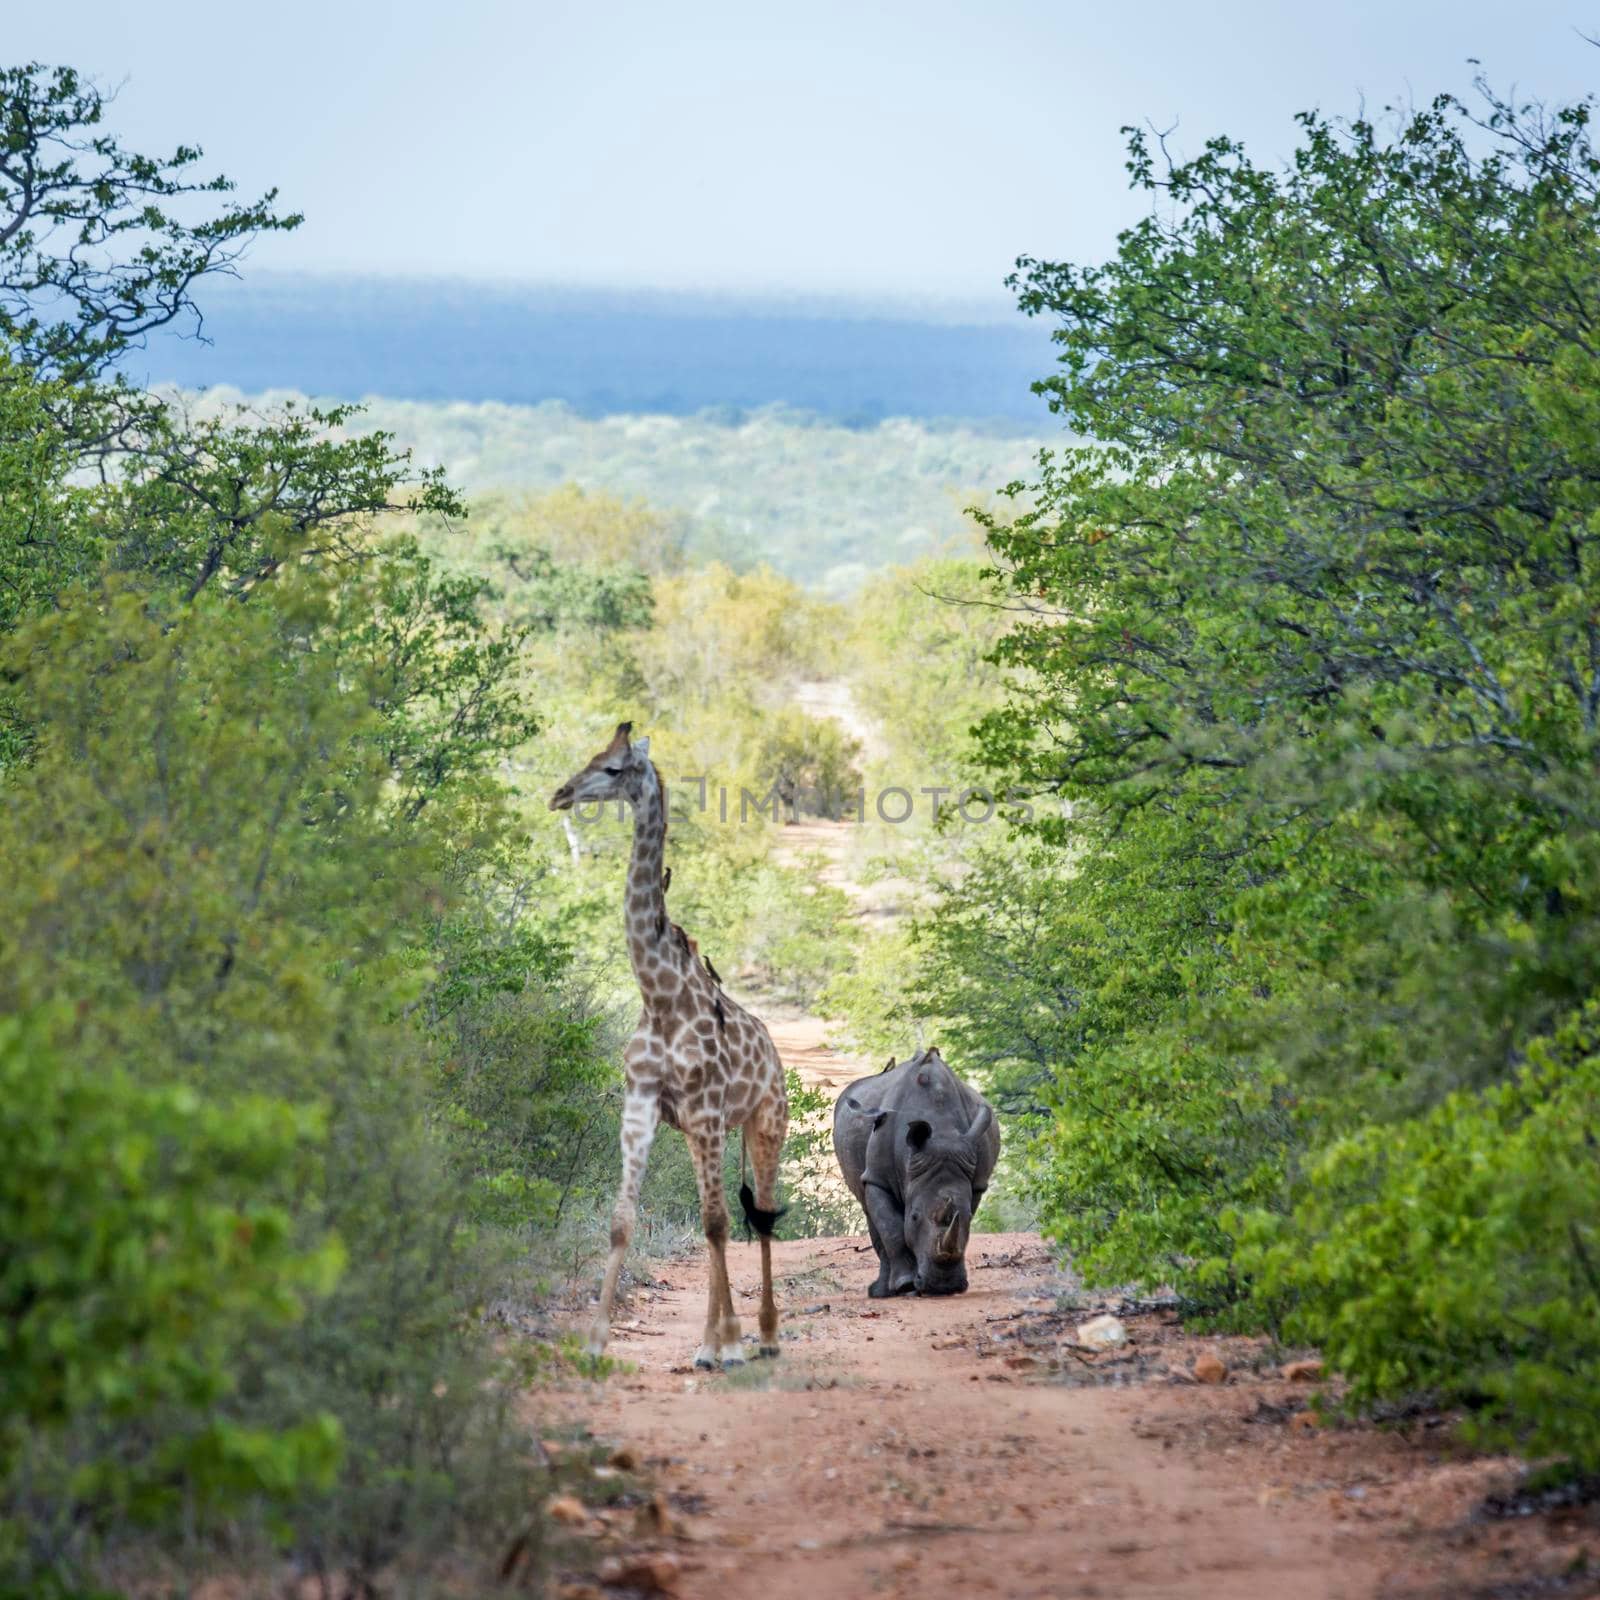 Southern white rhinoceros and Giraffe in Kruger national park, South Africa ; Specie Ceratotherium simum simum and Giraffa camelopardalis 